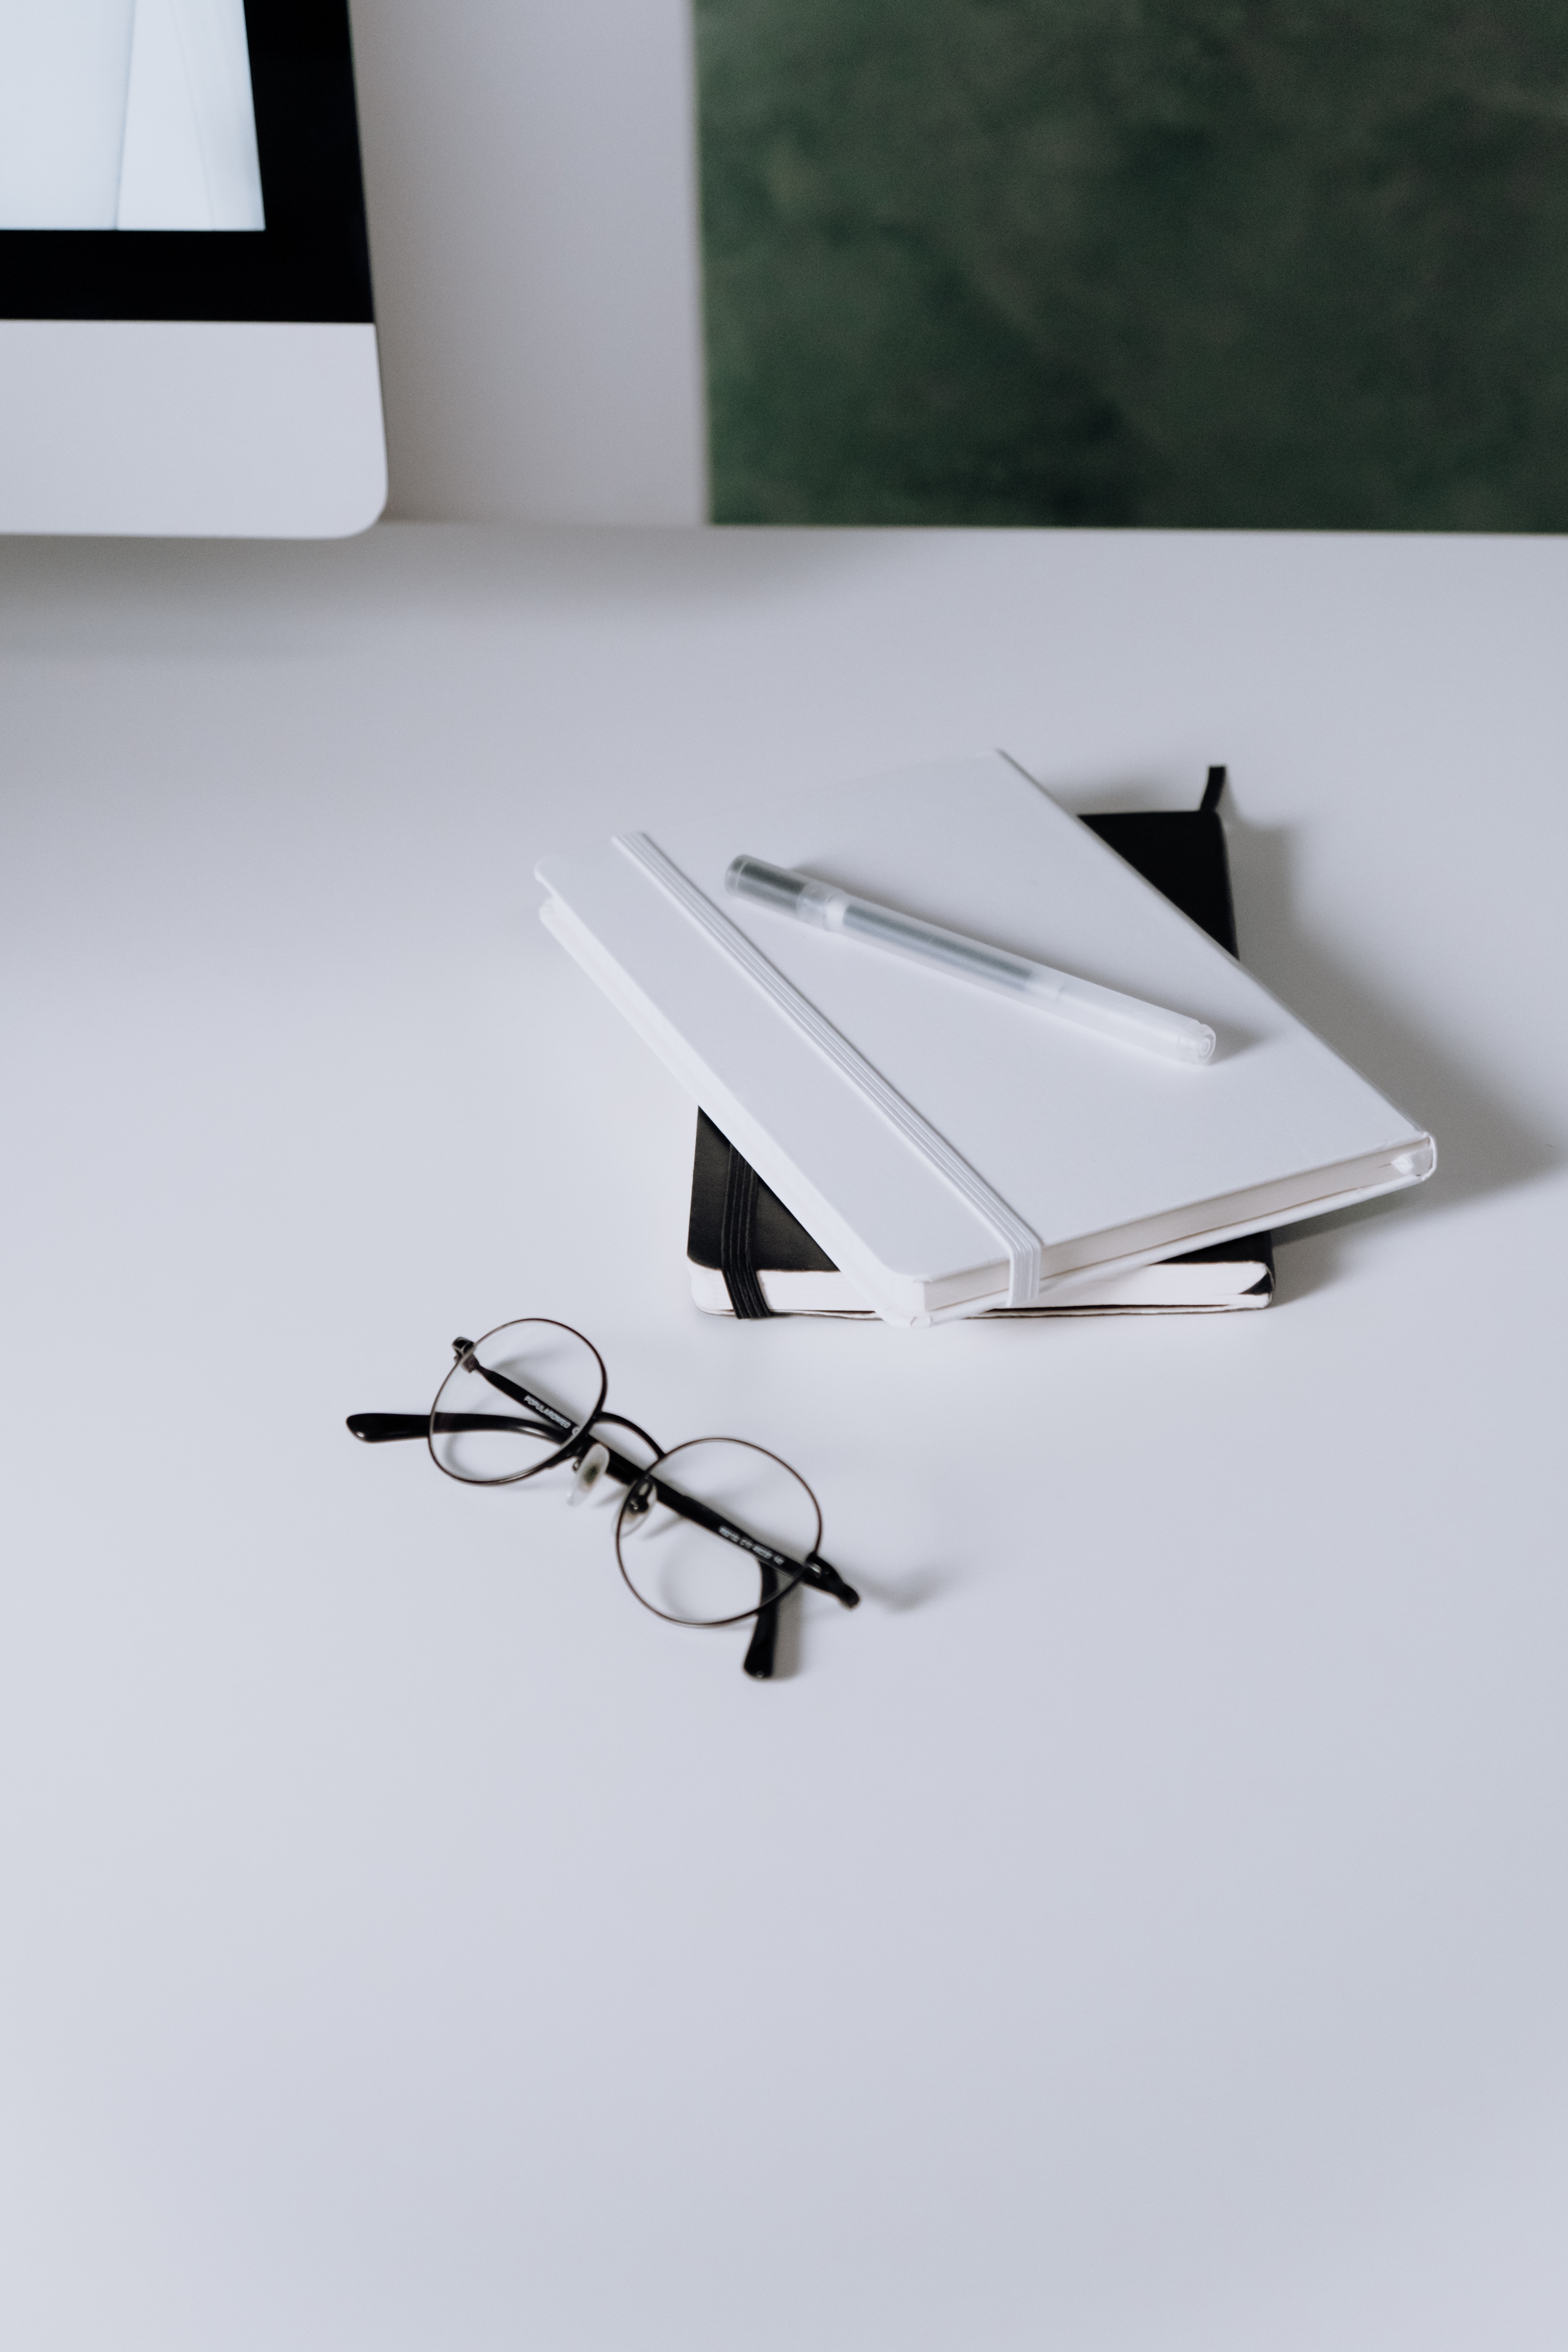 glasses sitting on table with notebook